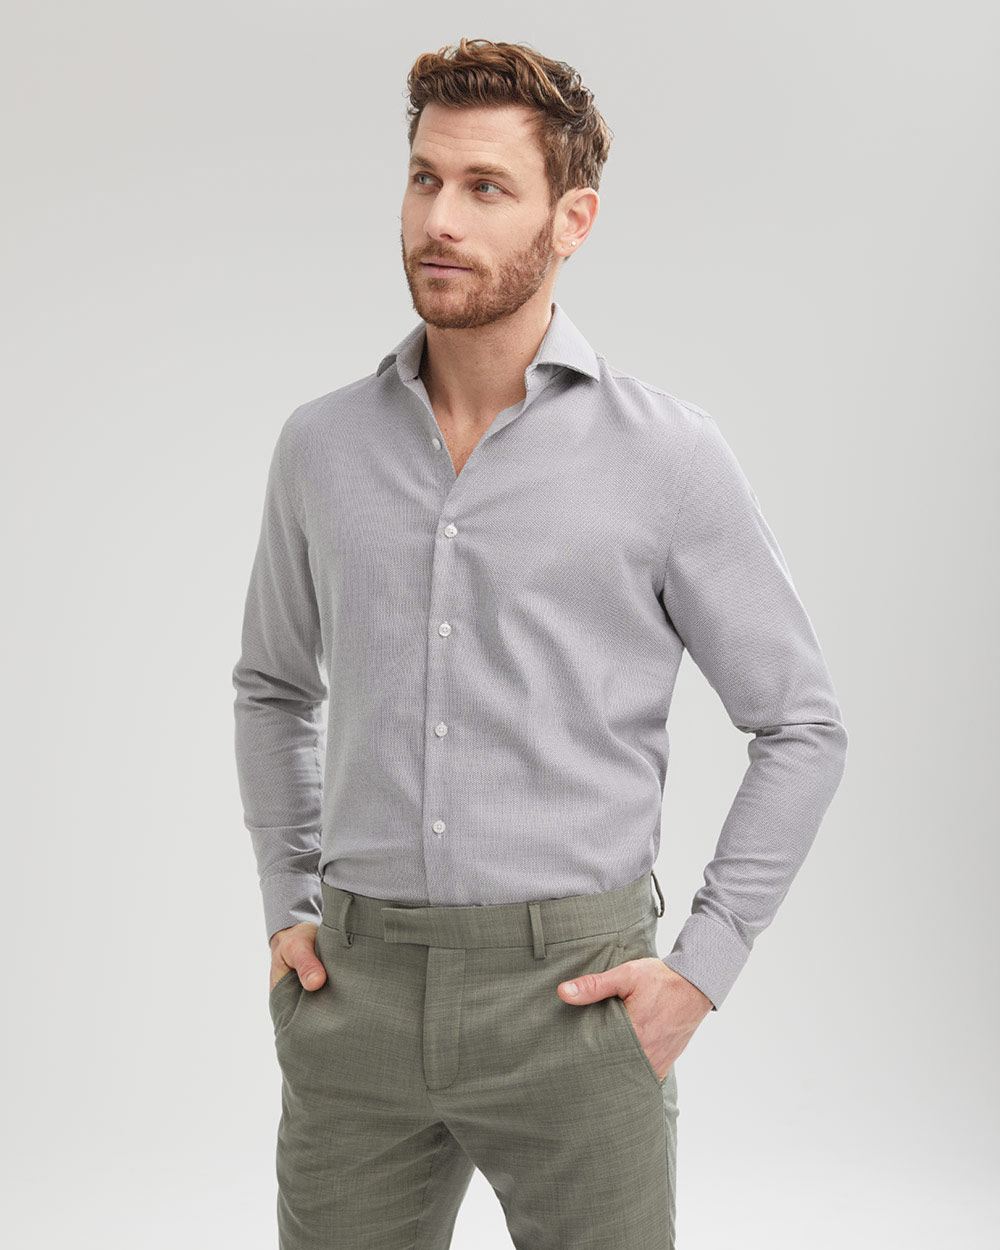 Tailored fit Wide Spread Collar dress shirt | RW&CO.